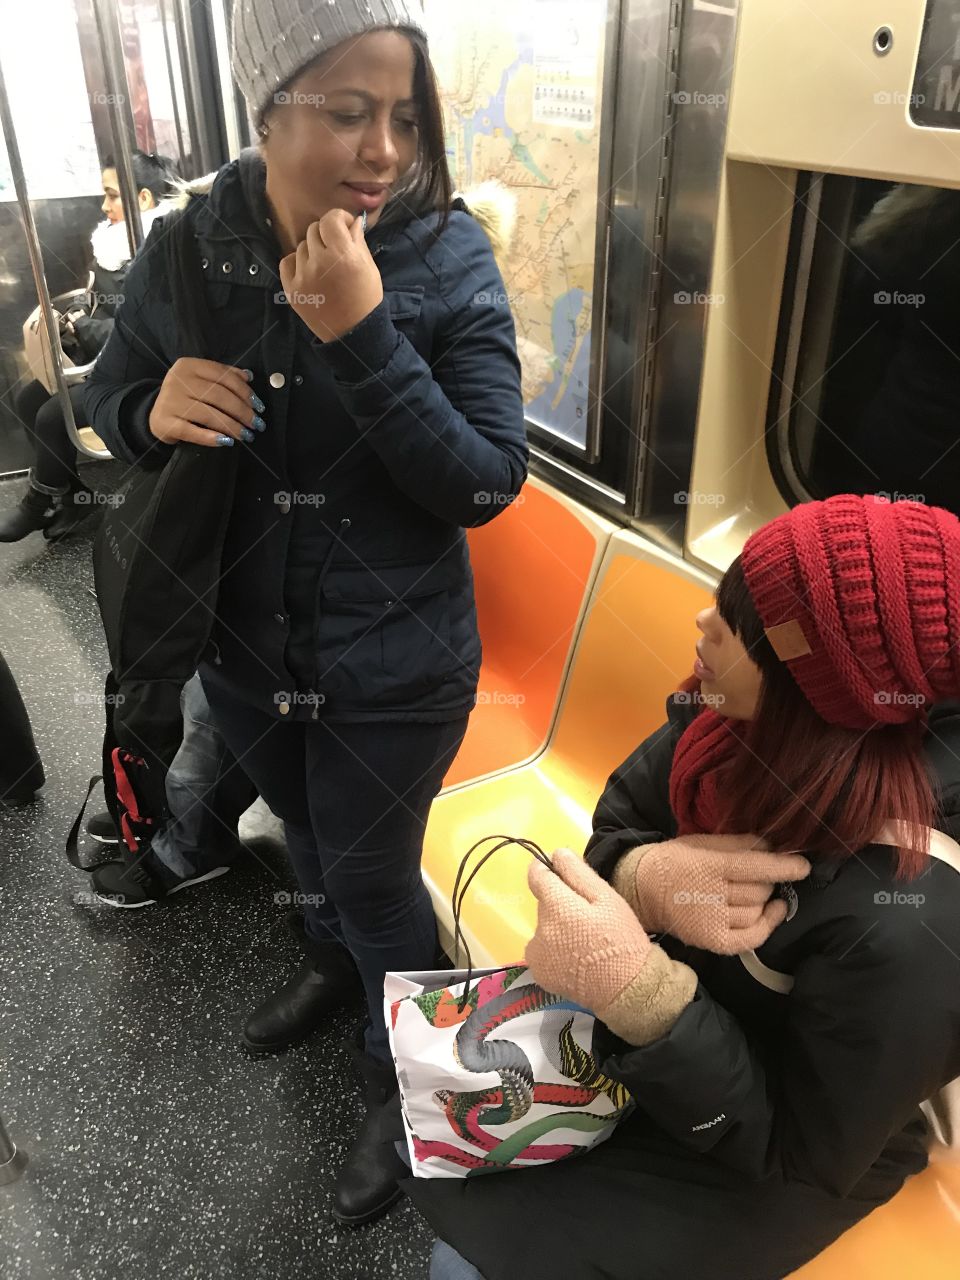 Two pretty girls discussing matters in Spanish early Sunday morning in Times Square on the S Shuttle Train.